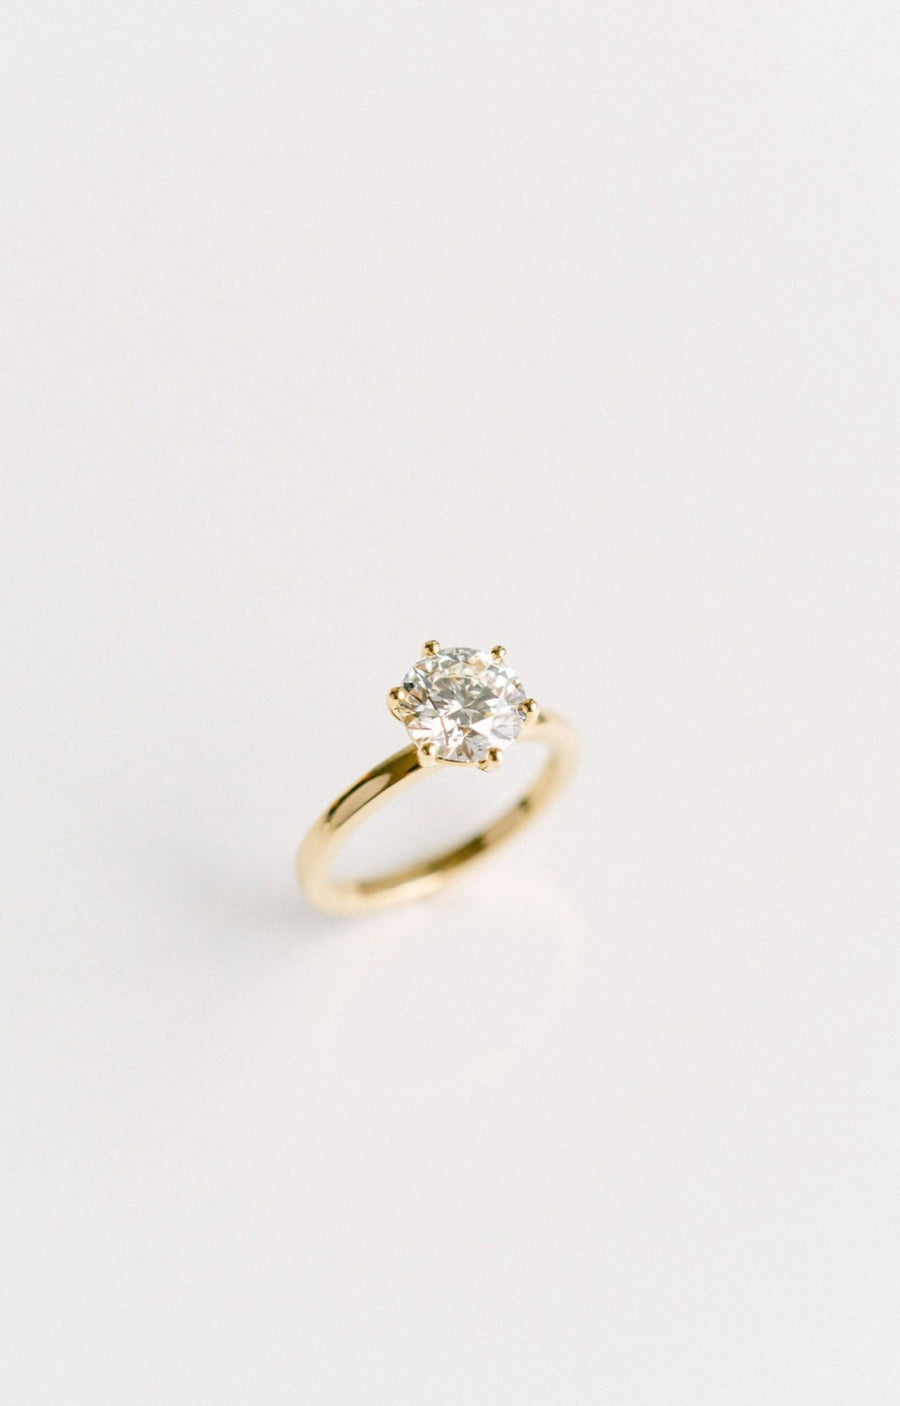 Round Brilliant Diamond Solitaire Engagement Ring With A 6-Prong Detail, 14k Yellow Gold